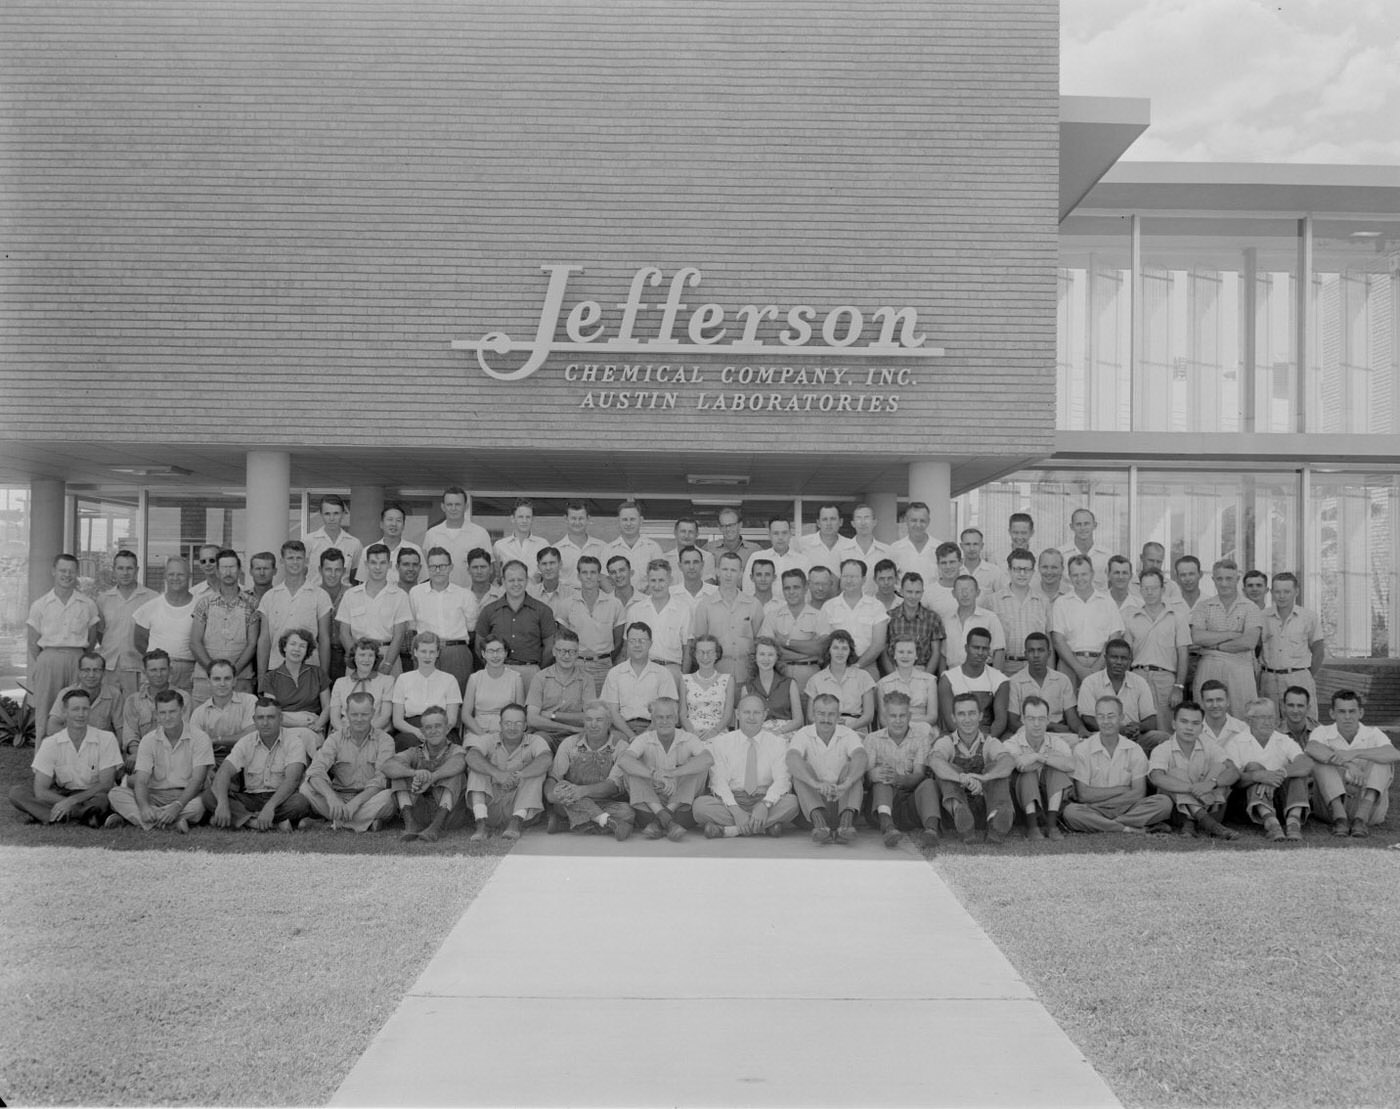 Employees Posing in Front of Jefferson Chemical Company Plant, 1954.